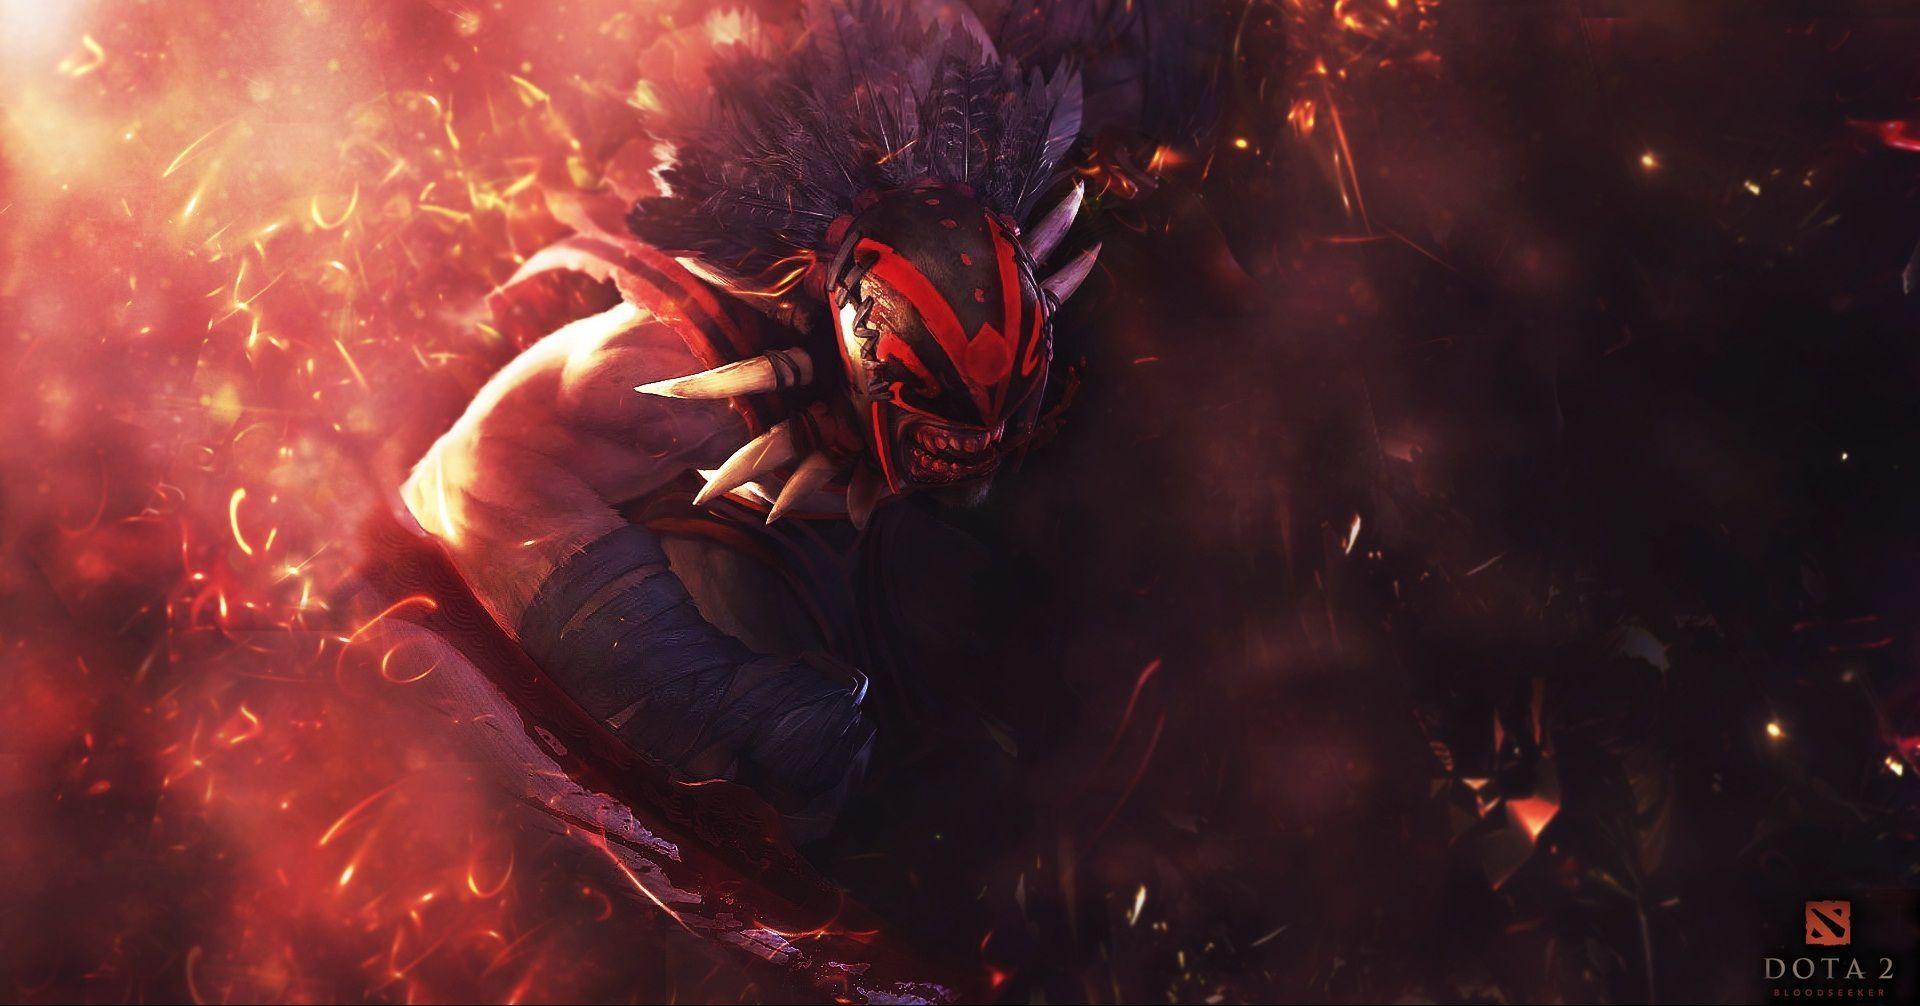 Dota 2 HD Wallpaper Android Application